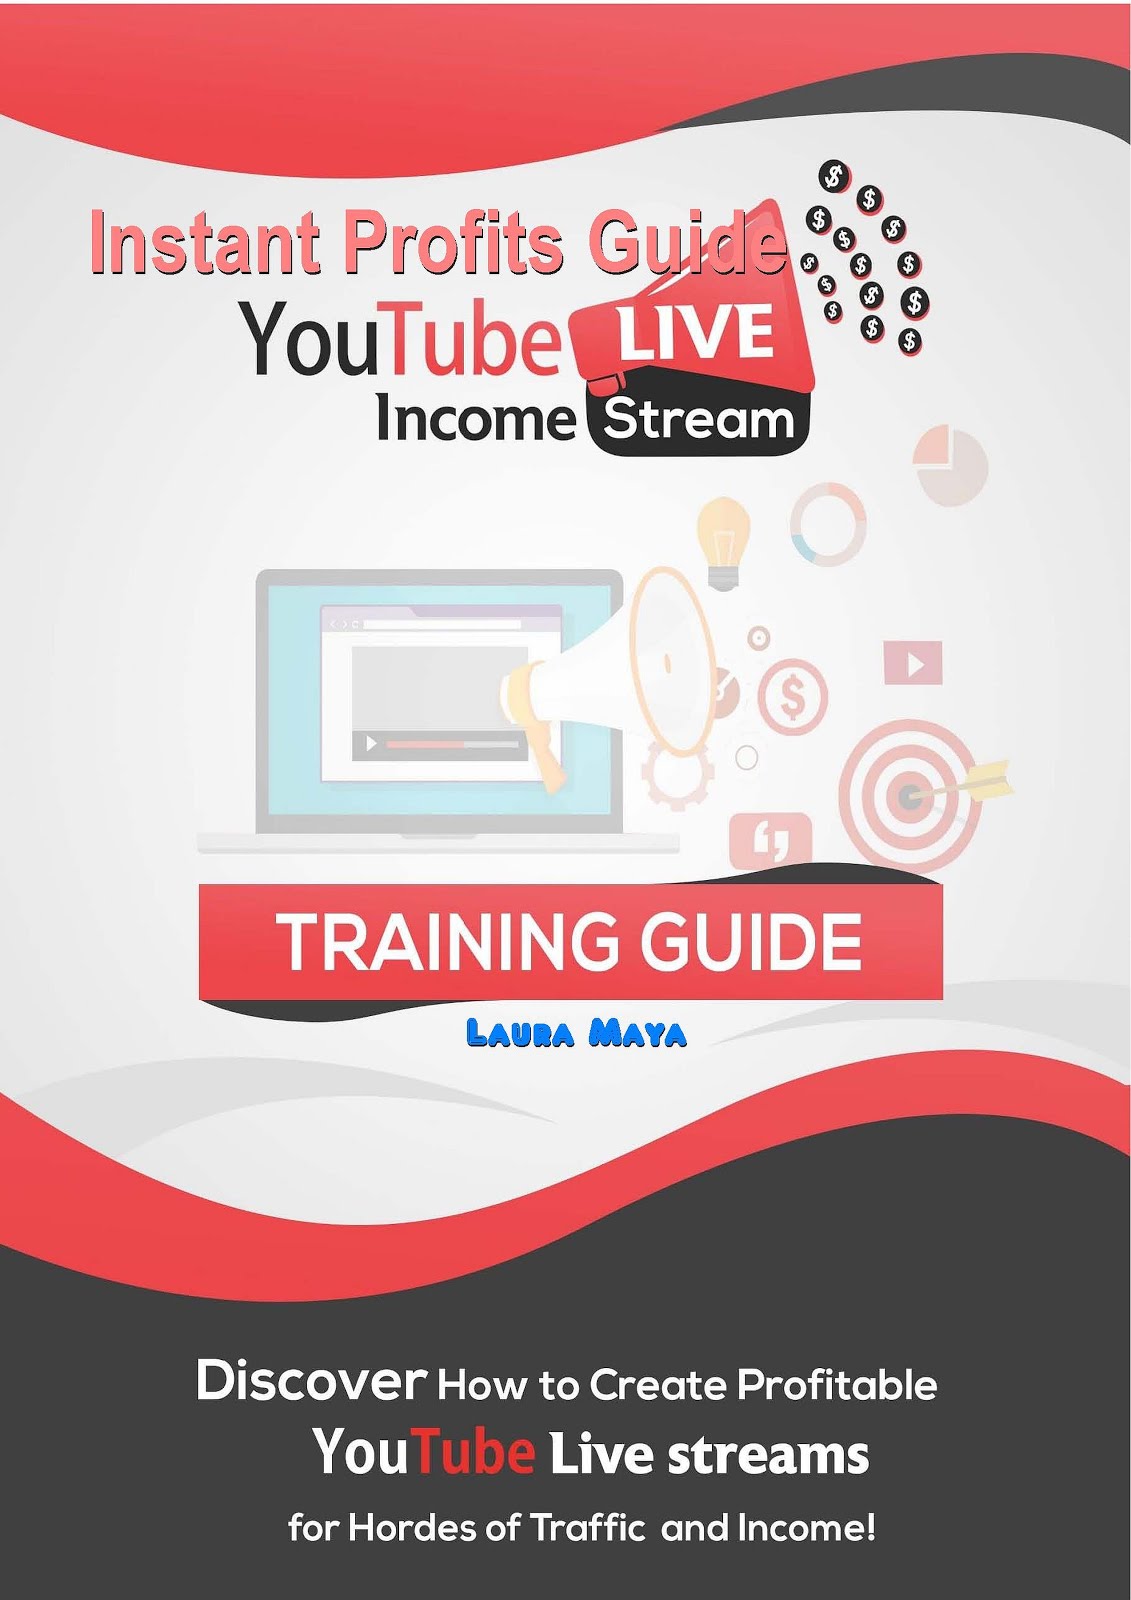 Instant Profits Guide YOUTUBE LIVE